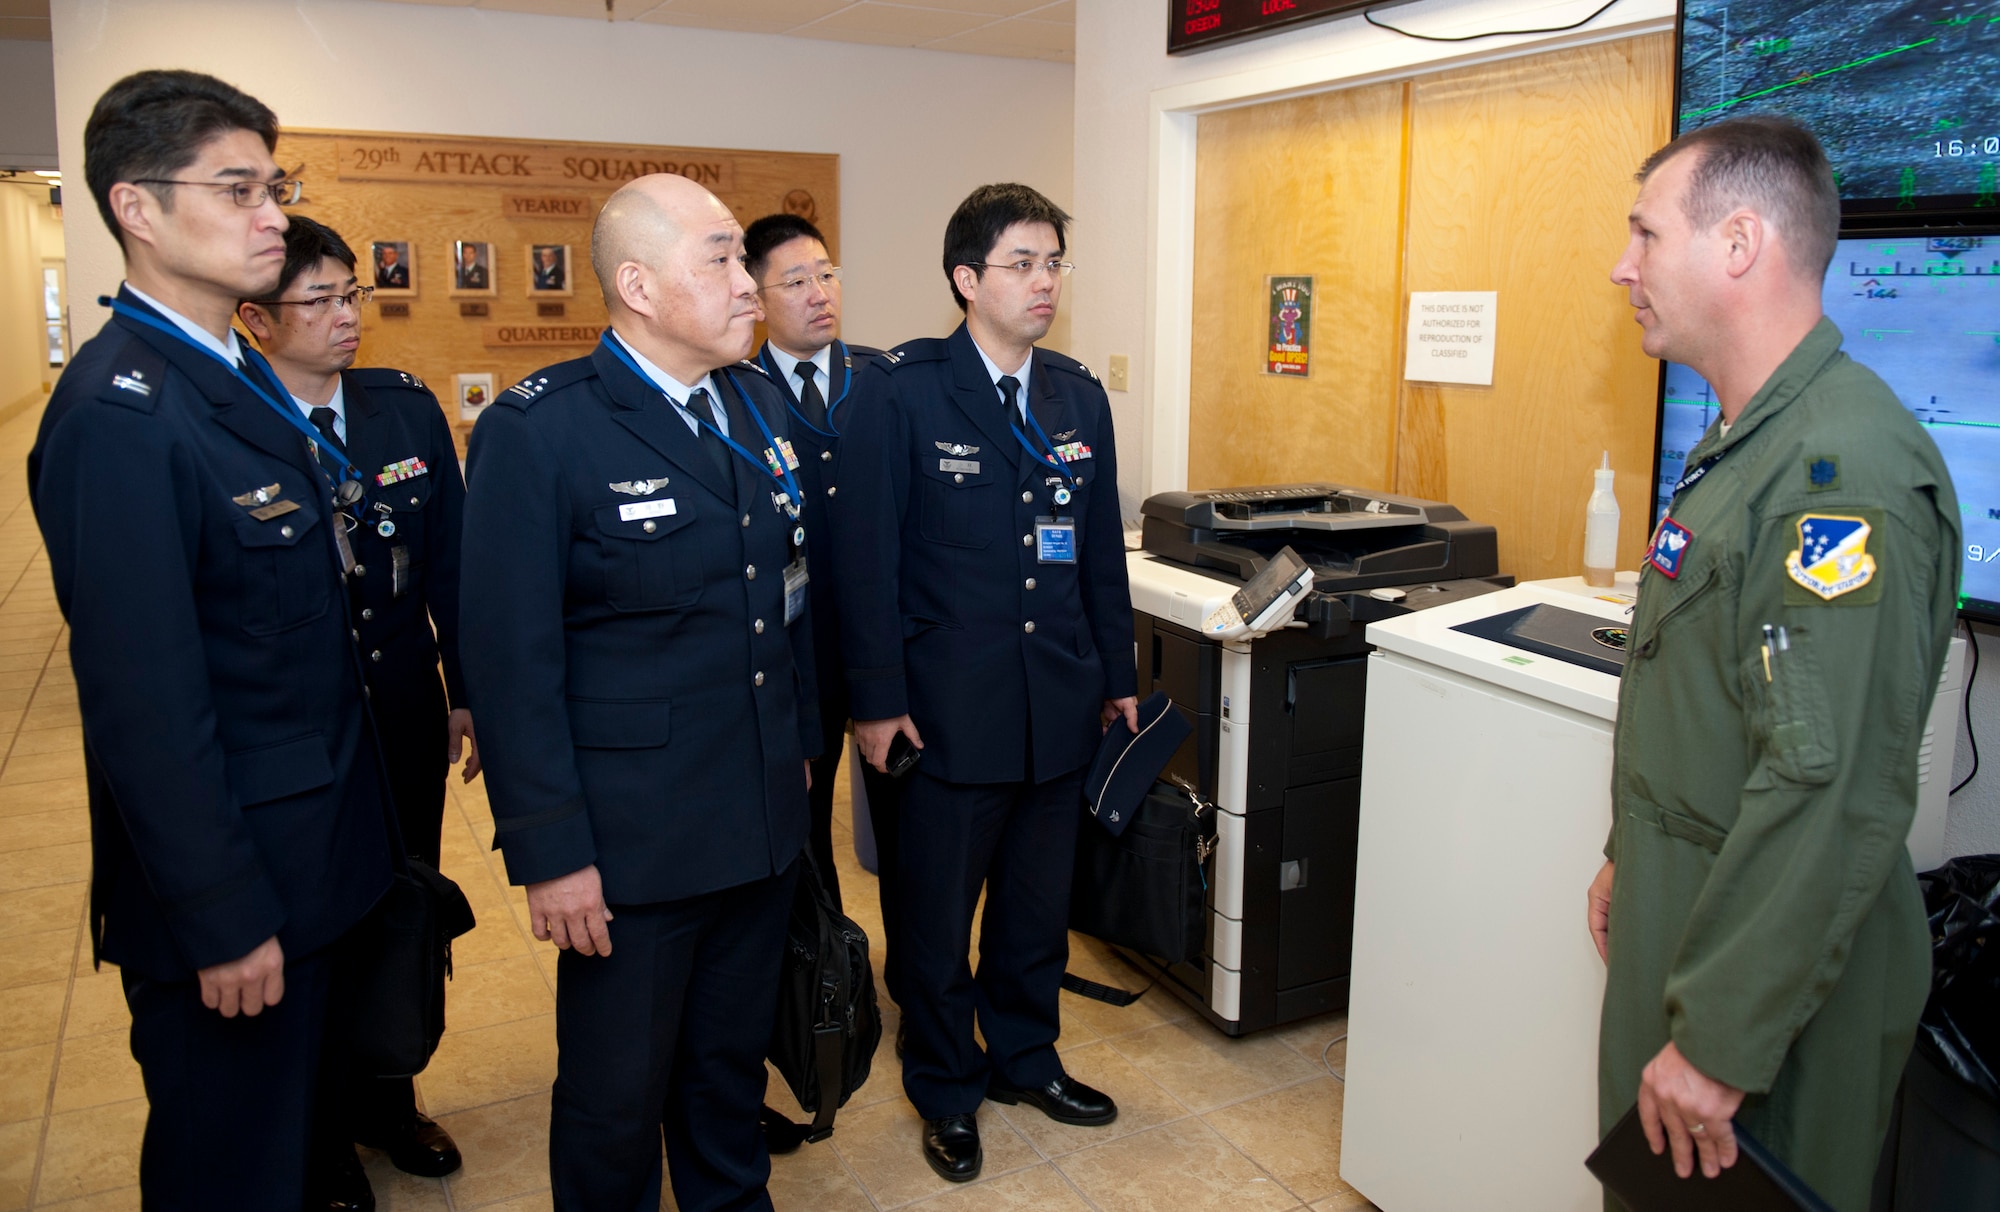 Lieutenant Col. Jeffery Patton, 9th Attack Squadron commander, welcomes members of the Japan Air Self Defense Force to Holloman Air Force Base, N.M., March 19. The Remotely Piloted Aircraft program was briefed to the members of the Japan Air Self Defense Force. Their visit to Holloman AFB was part of an effort to bolster Japanese intelligence, surveillance and reconnaissance capability. (U.S. Air Force photo by Airman 1st Class Colin Cates/Released) 